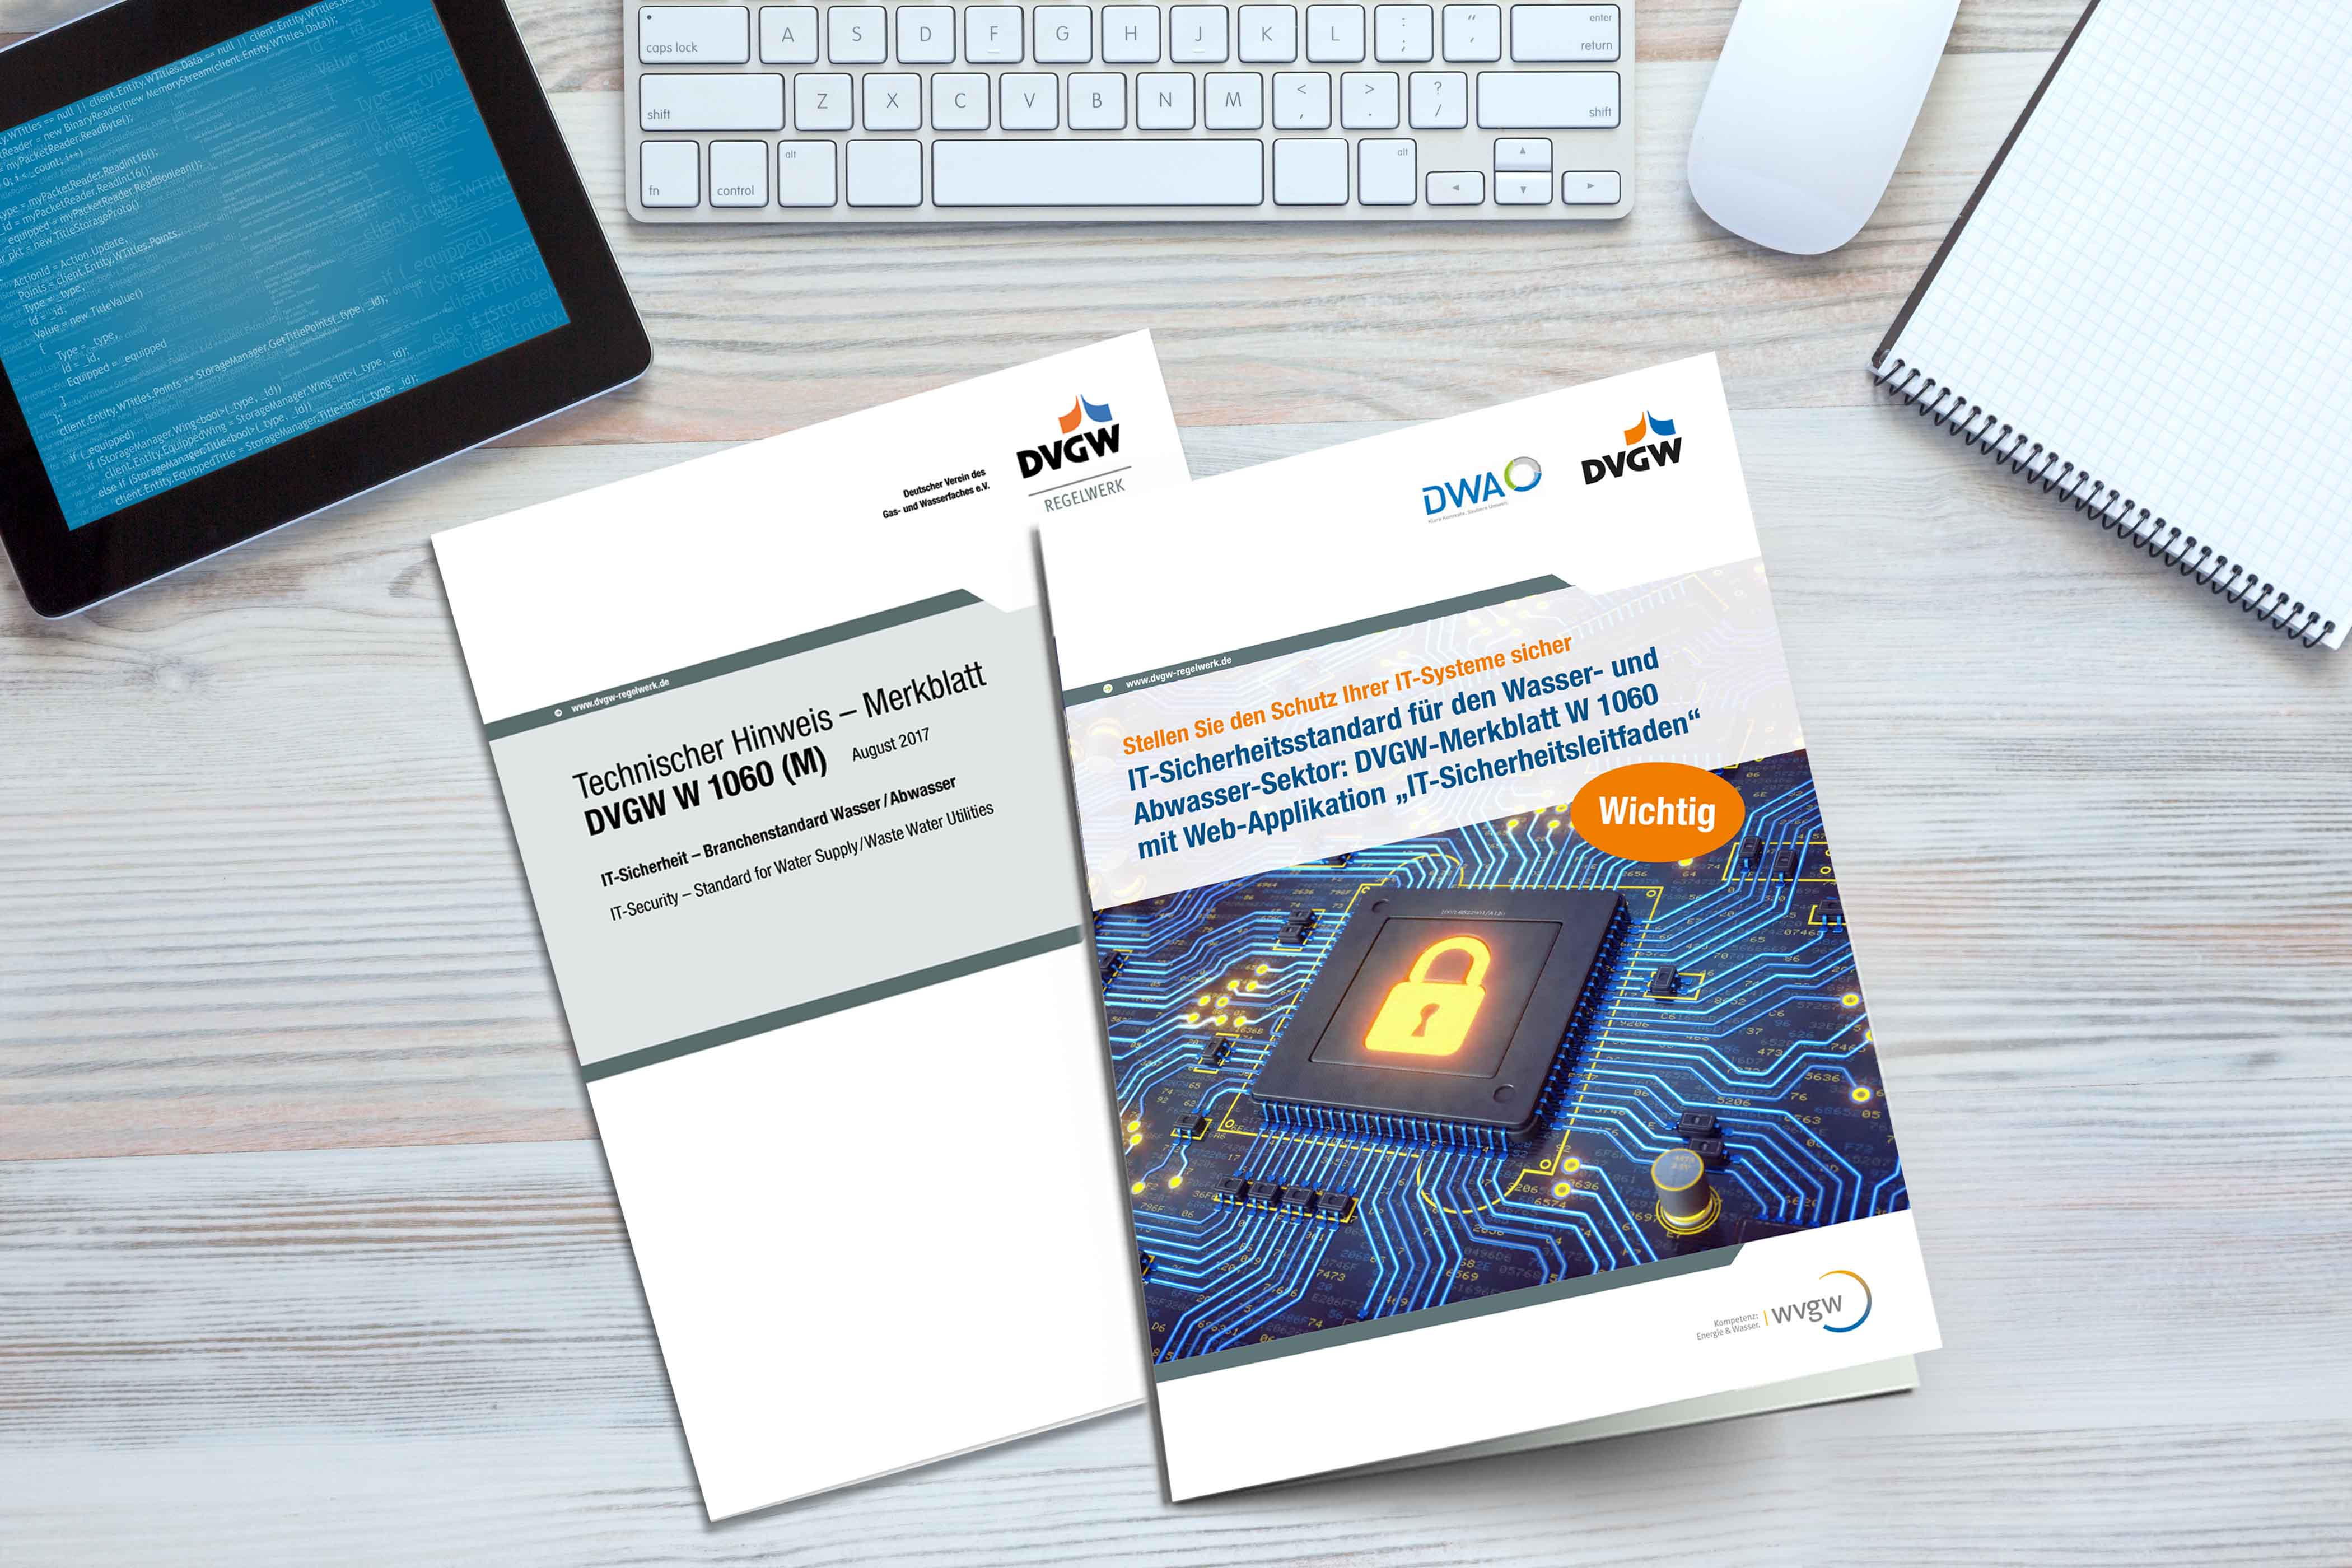 DVGW Guideline W 1060 with web application "IT Security Guide" for the protection of IT systems in the water and wastewater sector